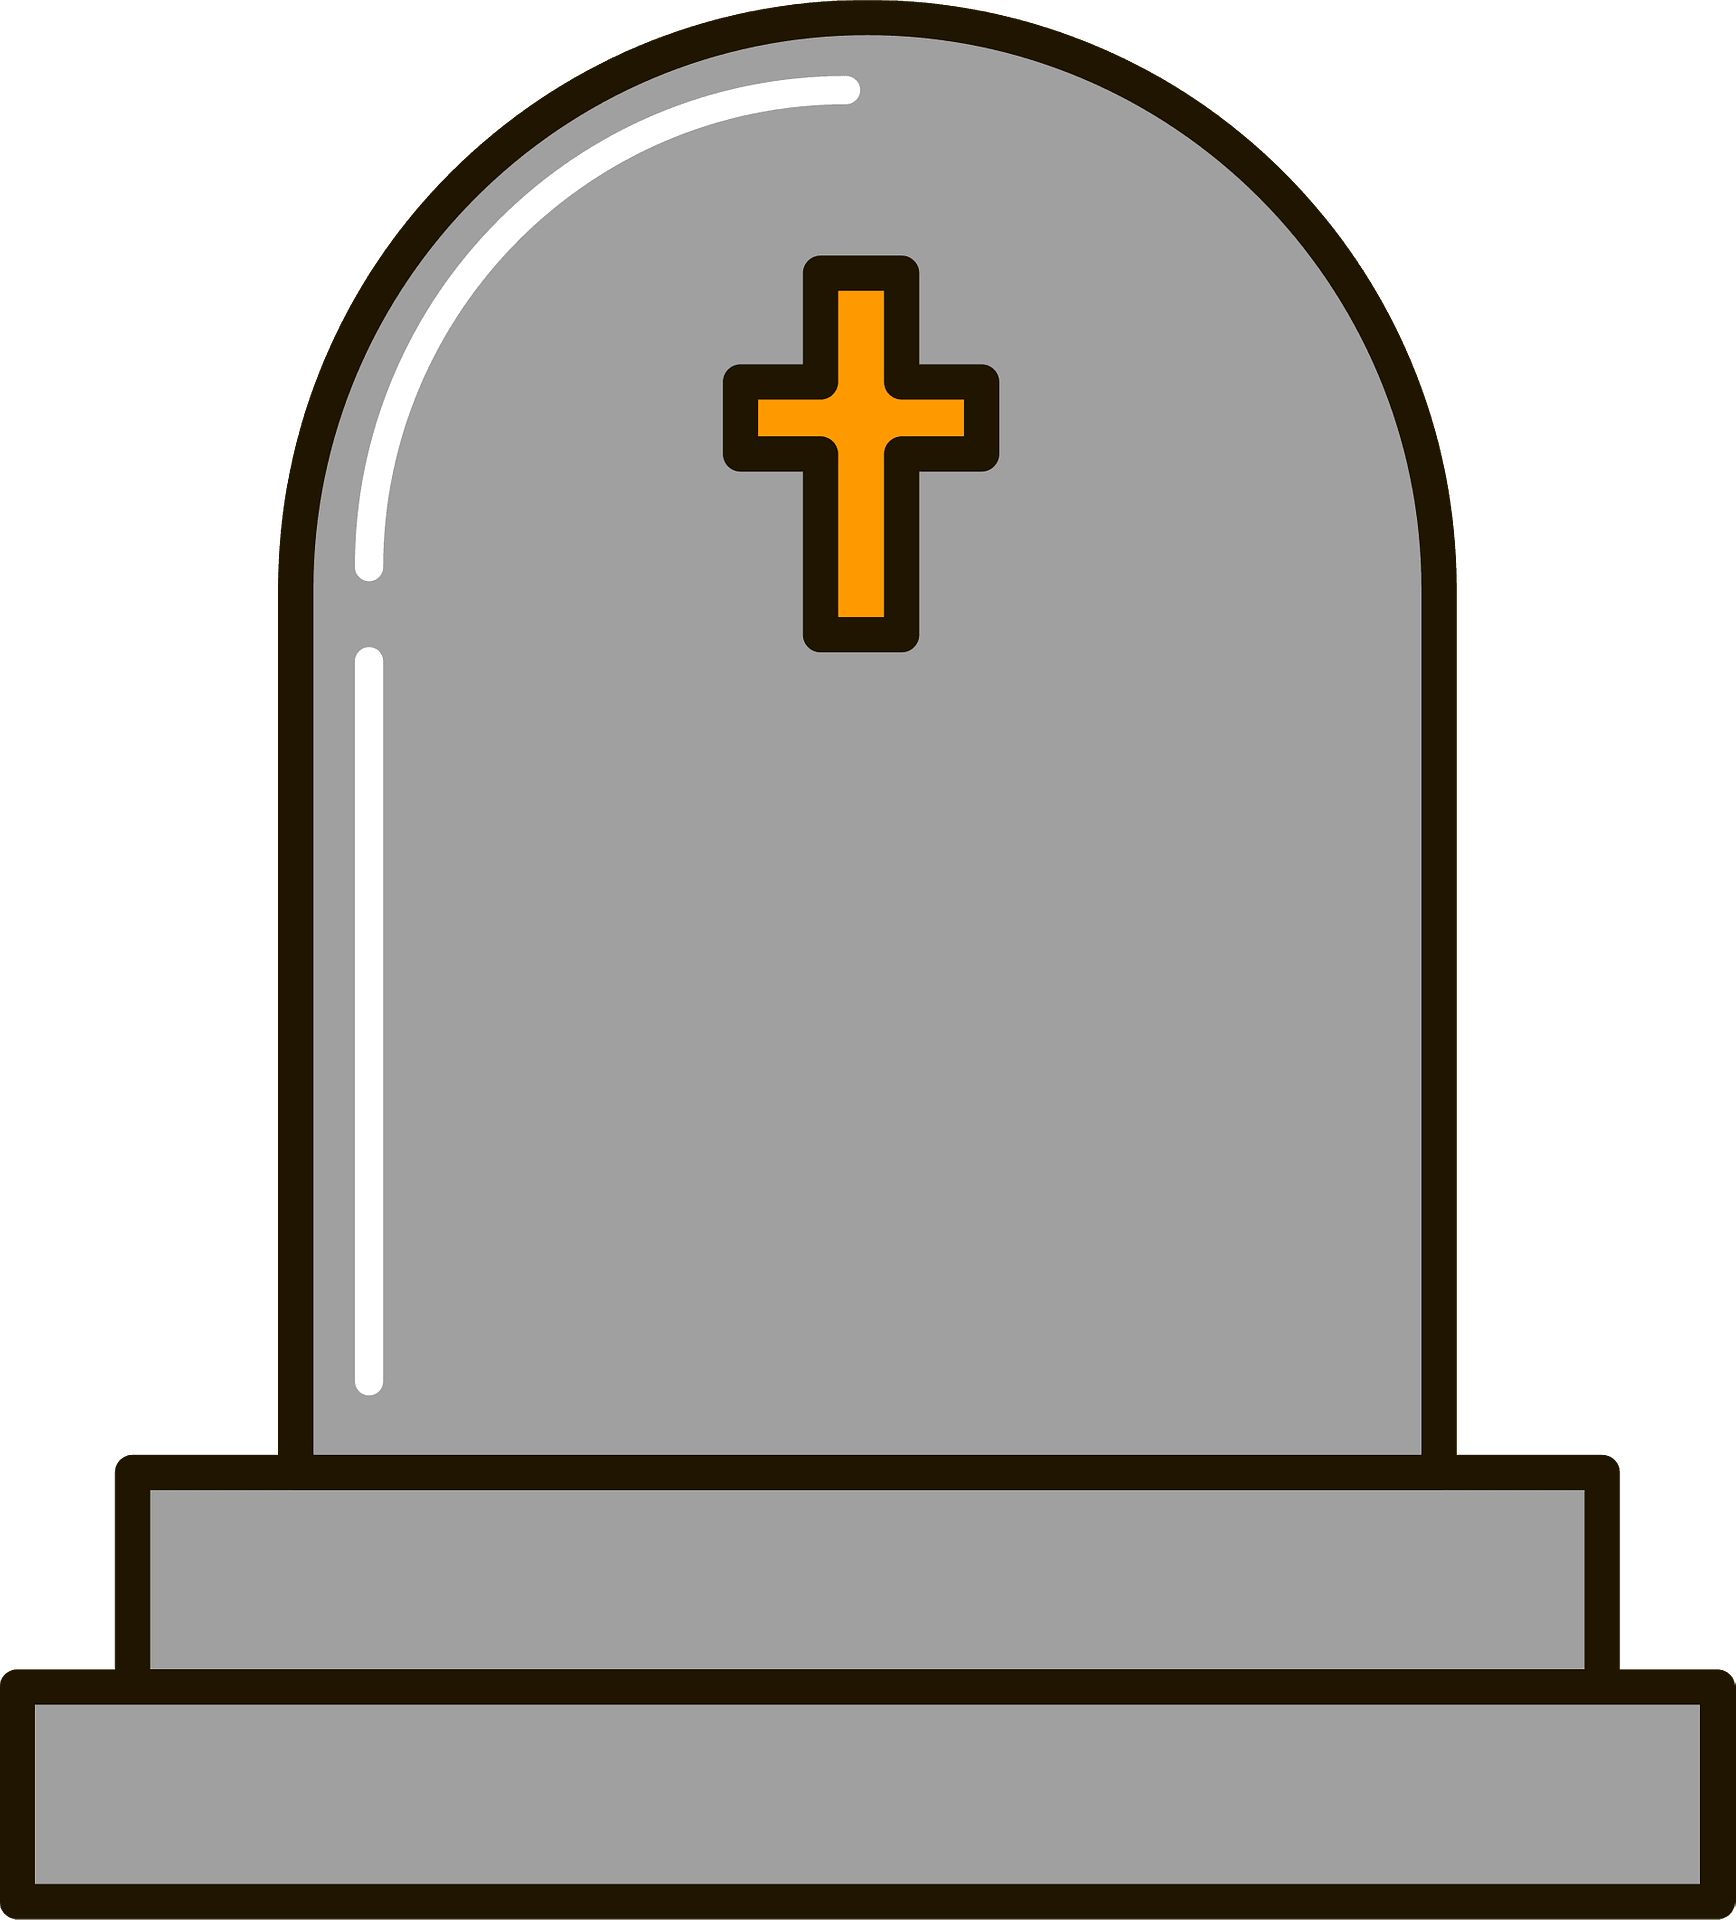 Free Rip Tombstone Clipart, Download Free Rip Tombstone Clipart - Clip ...